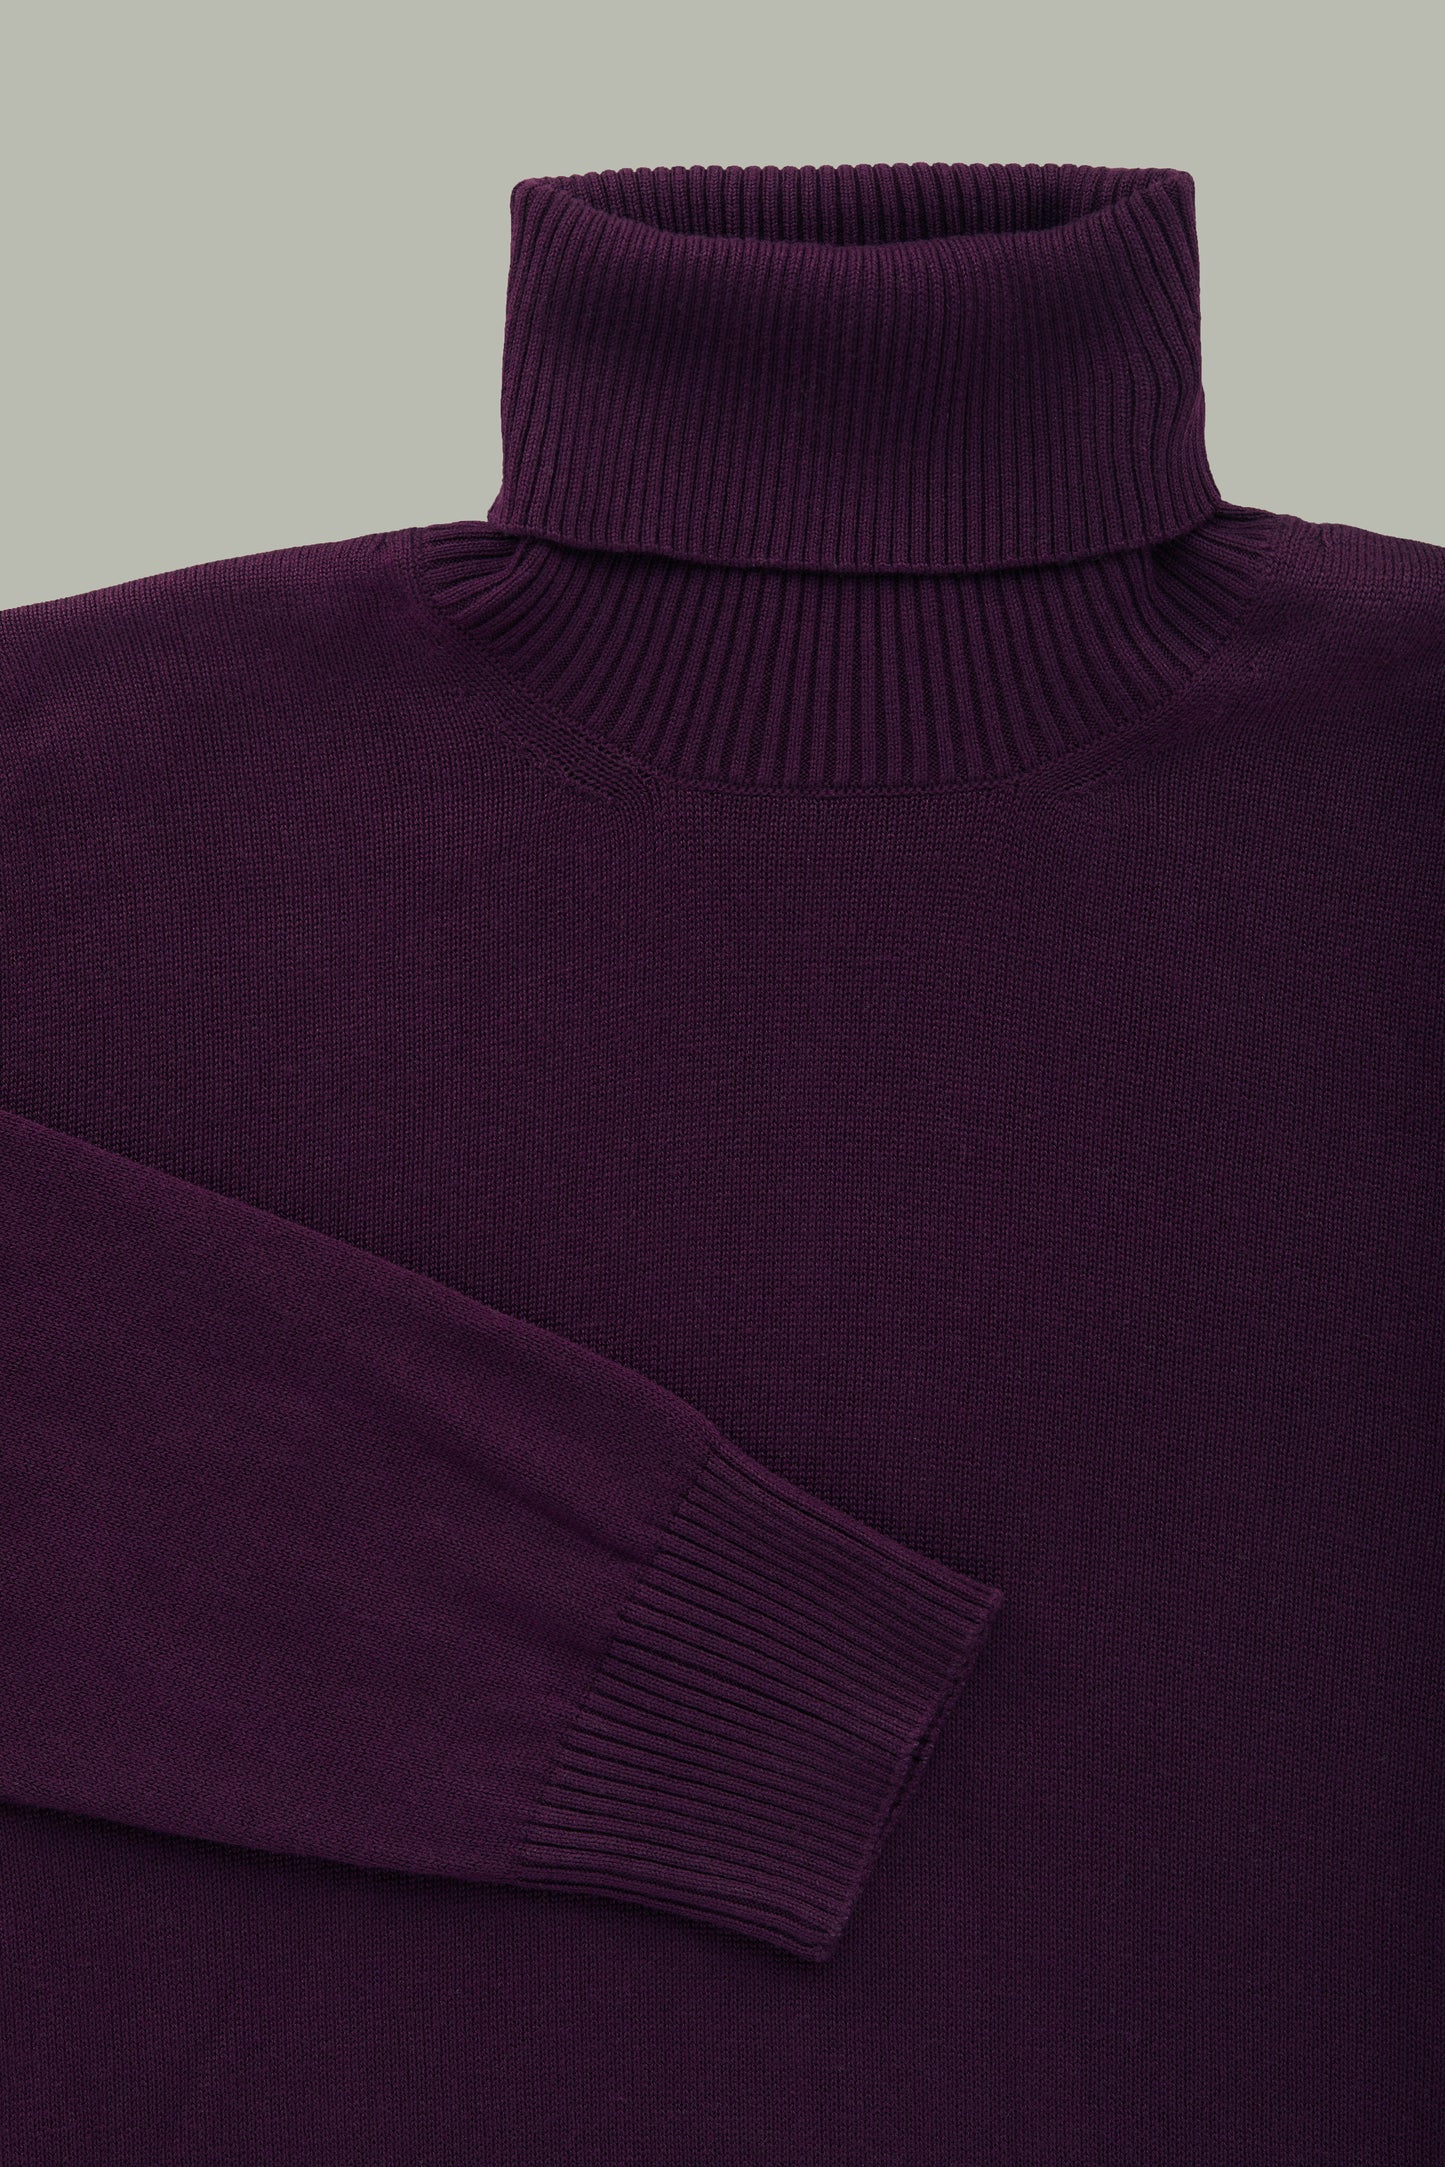 Long Sleeve Turtleneck Bamboo Cotton Cashmere Blend Knitted Sweater Purple